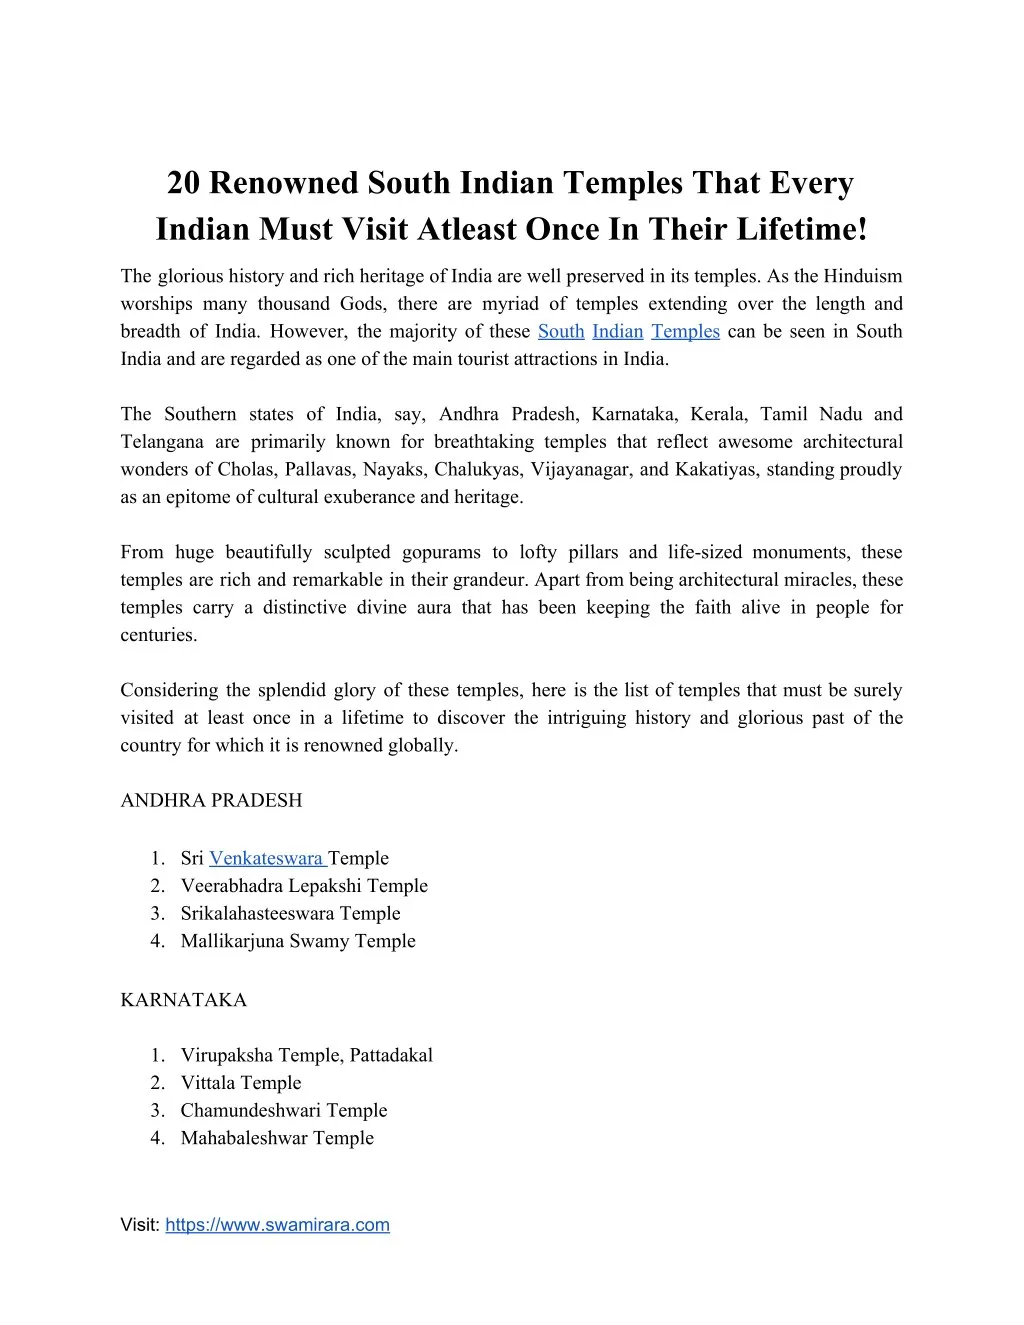 20 renowned south indian temples that every